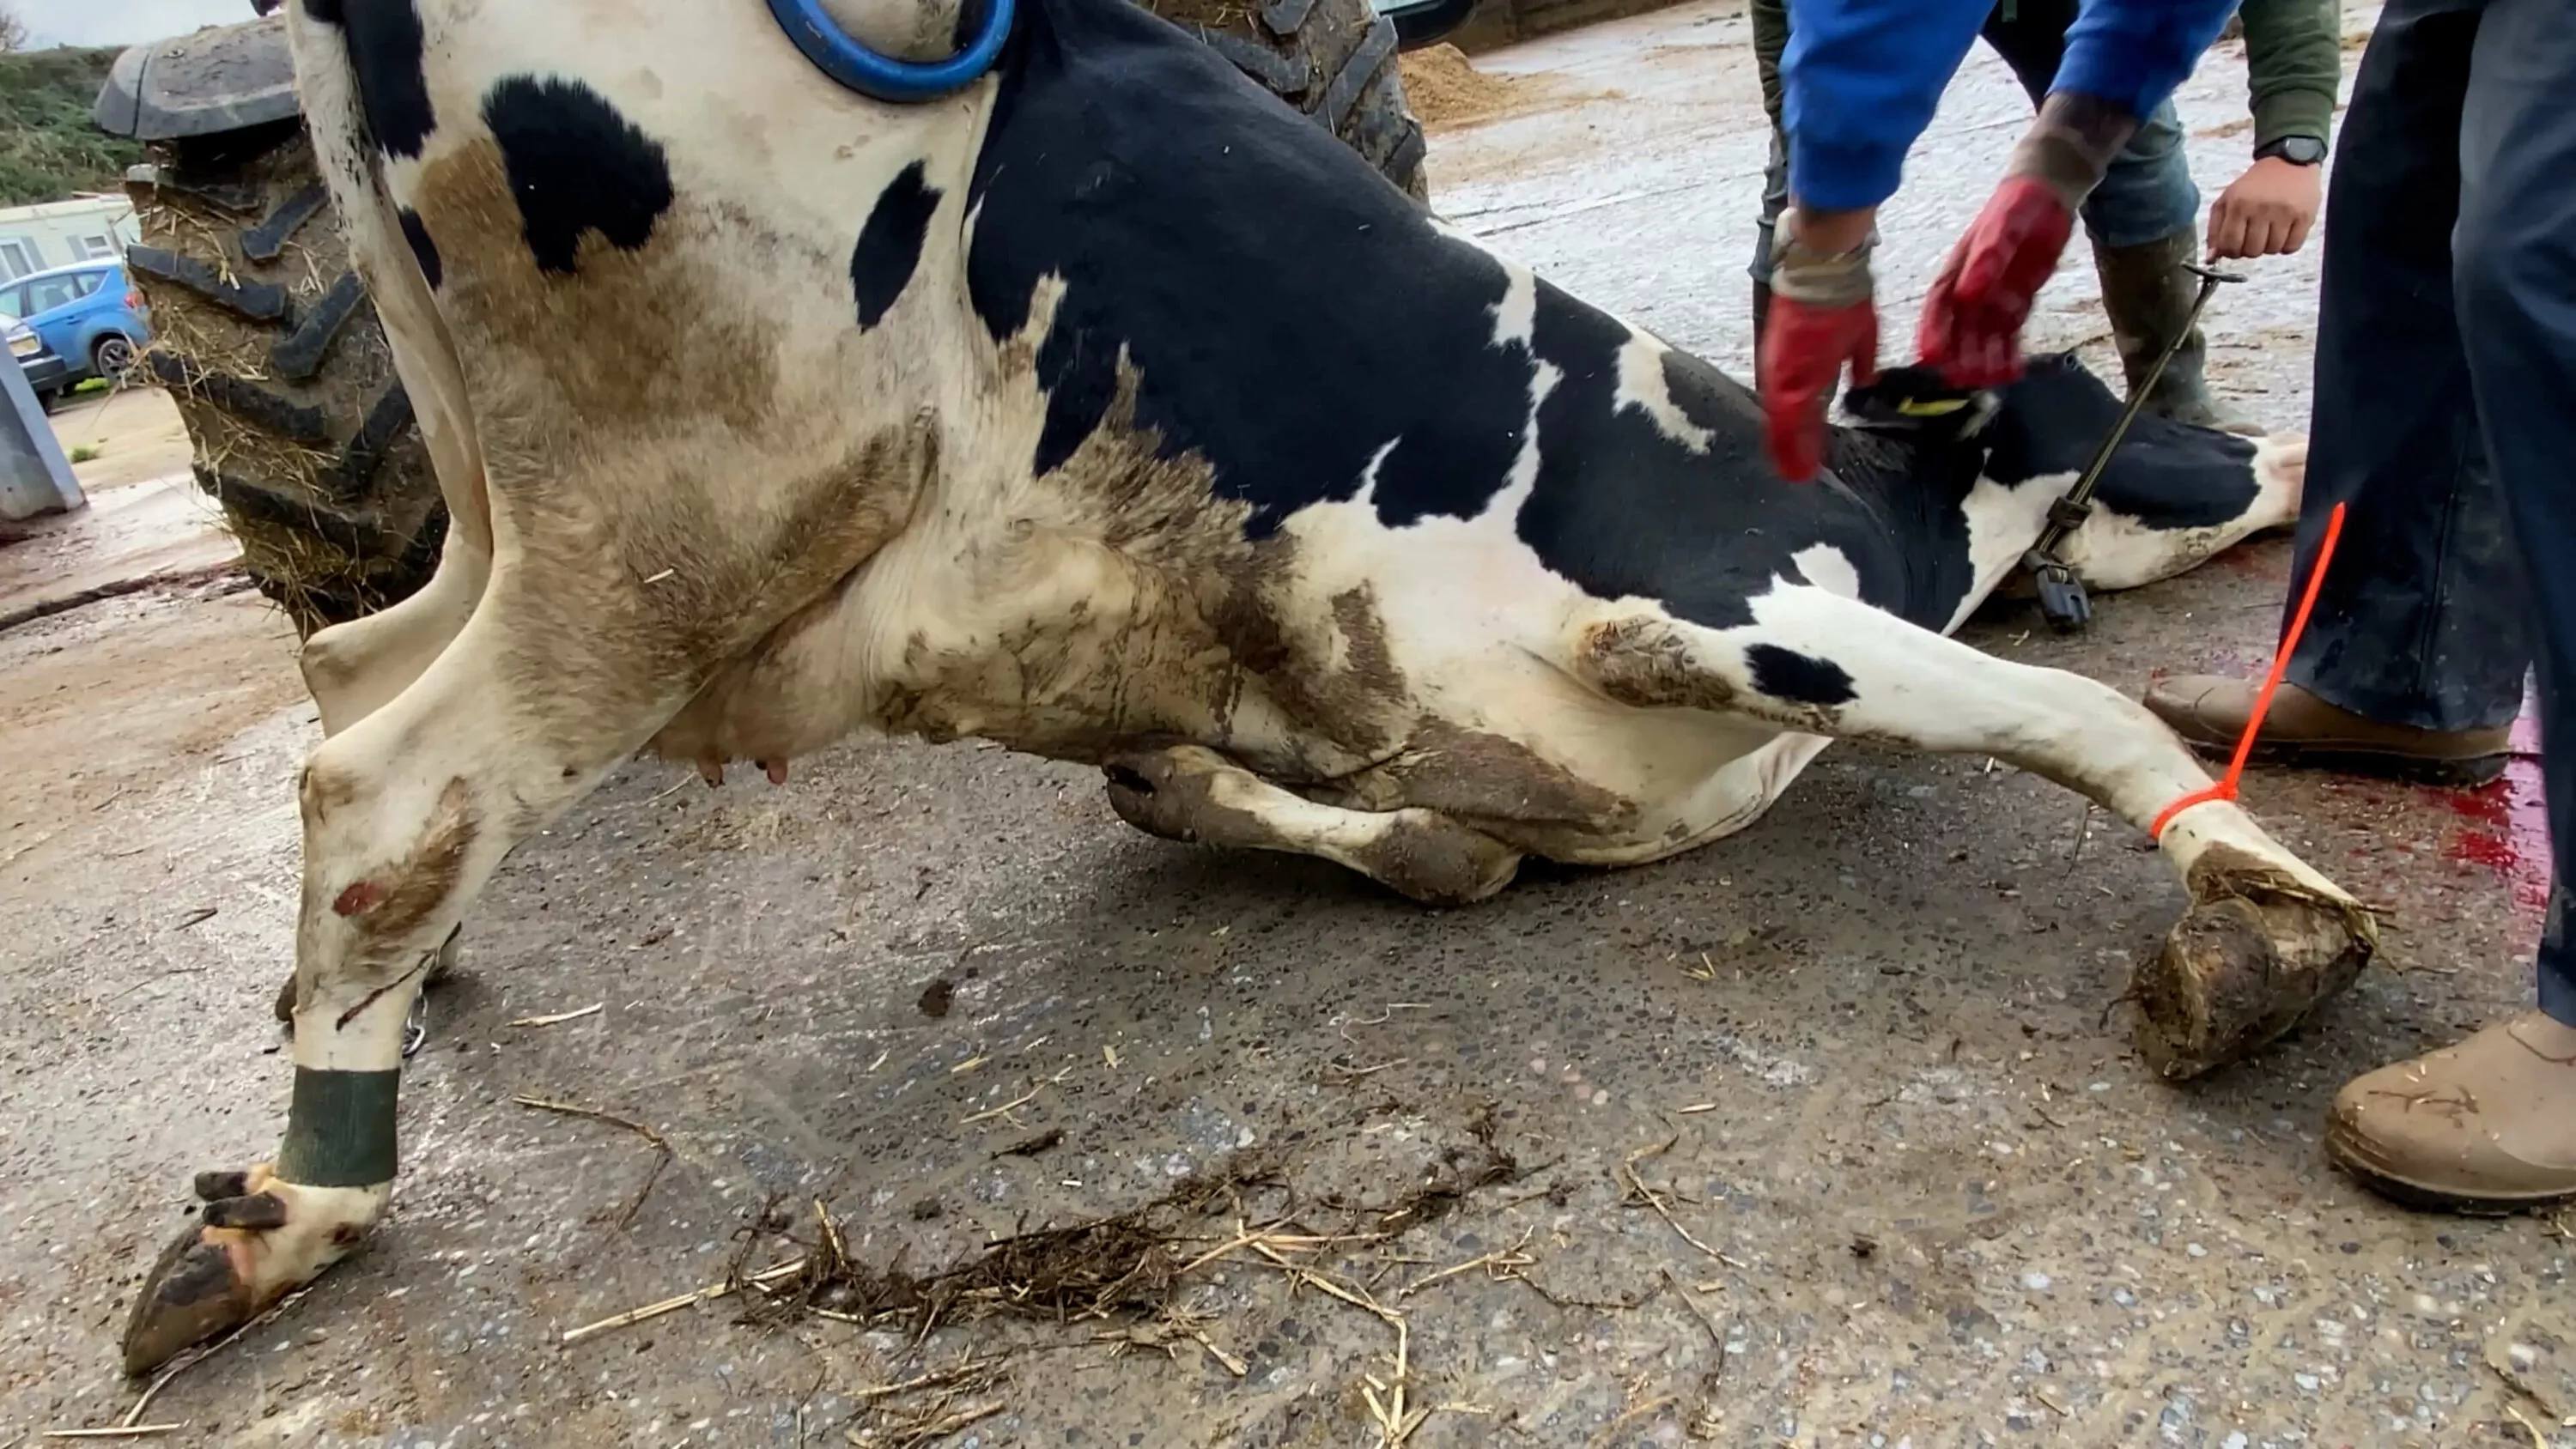 A lame cow struggles to stand up, while workers crowd around, on a Welsh dairy farm